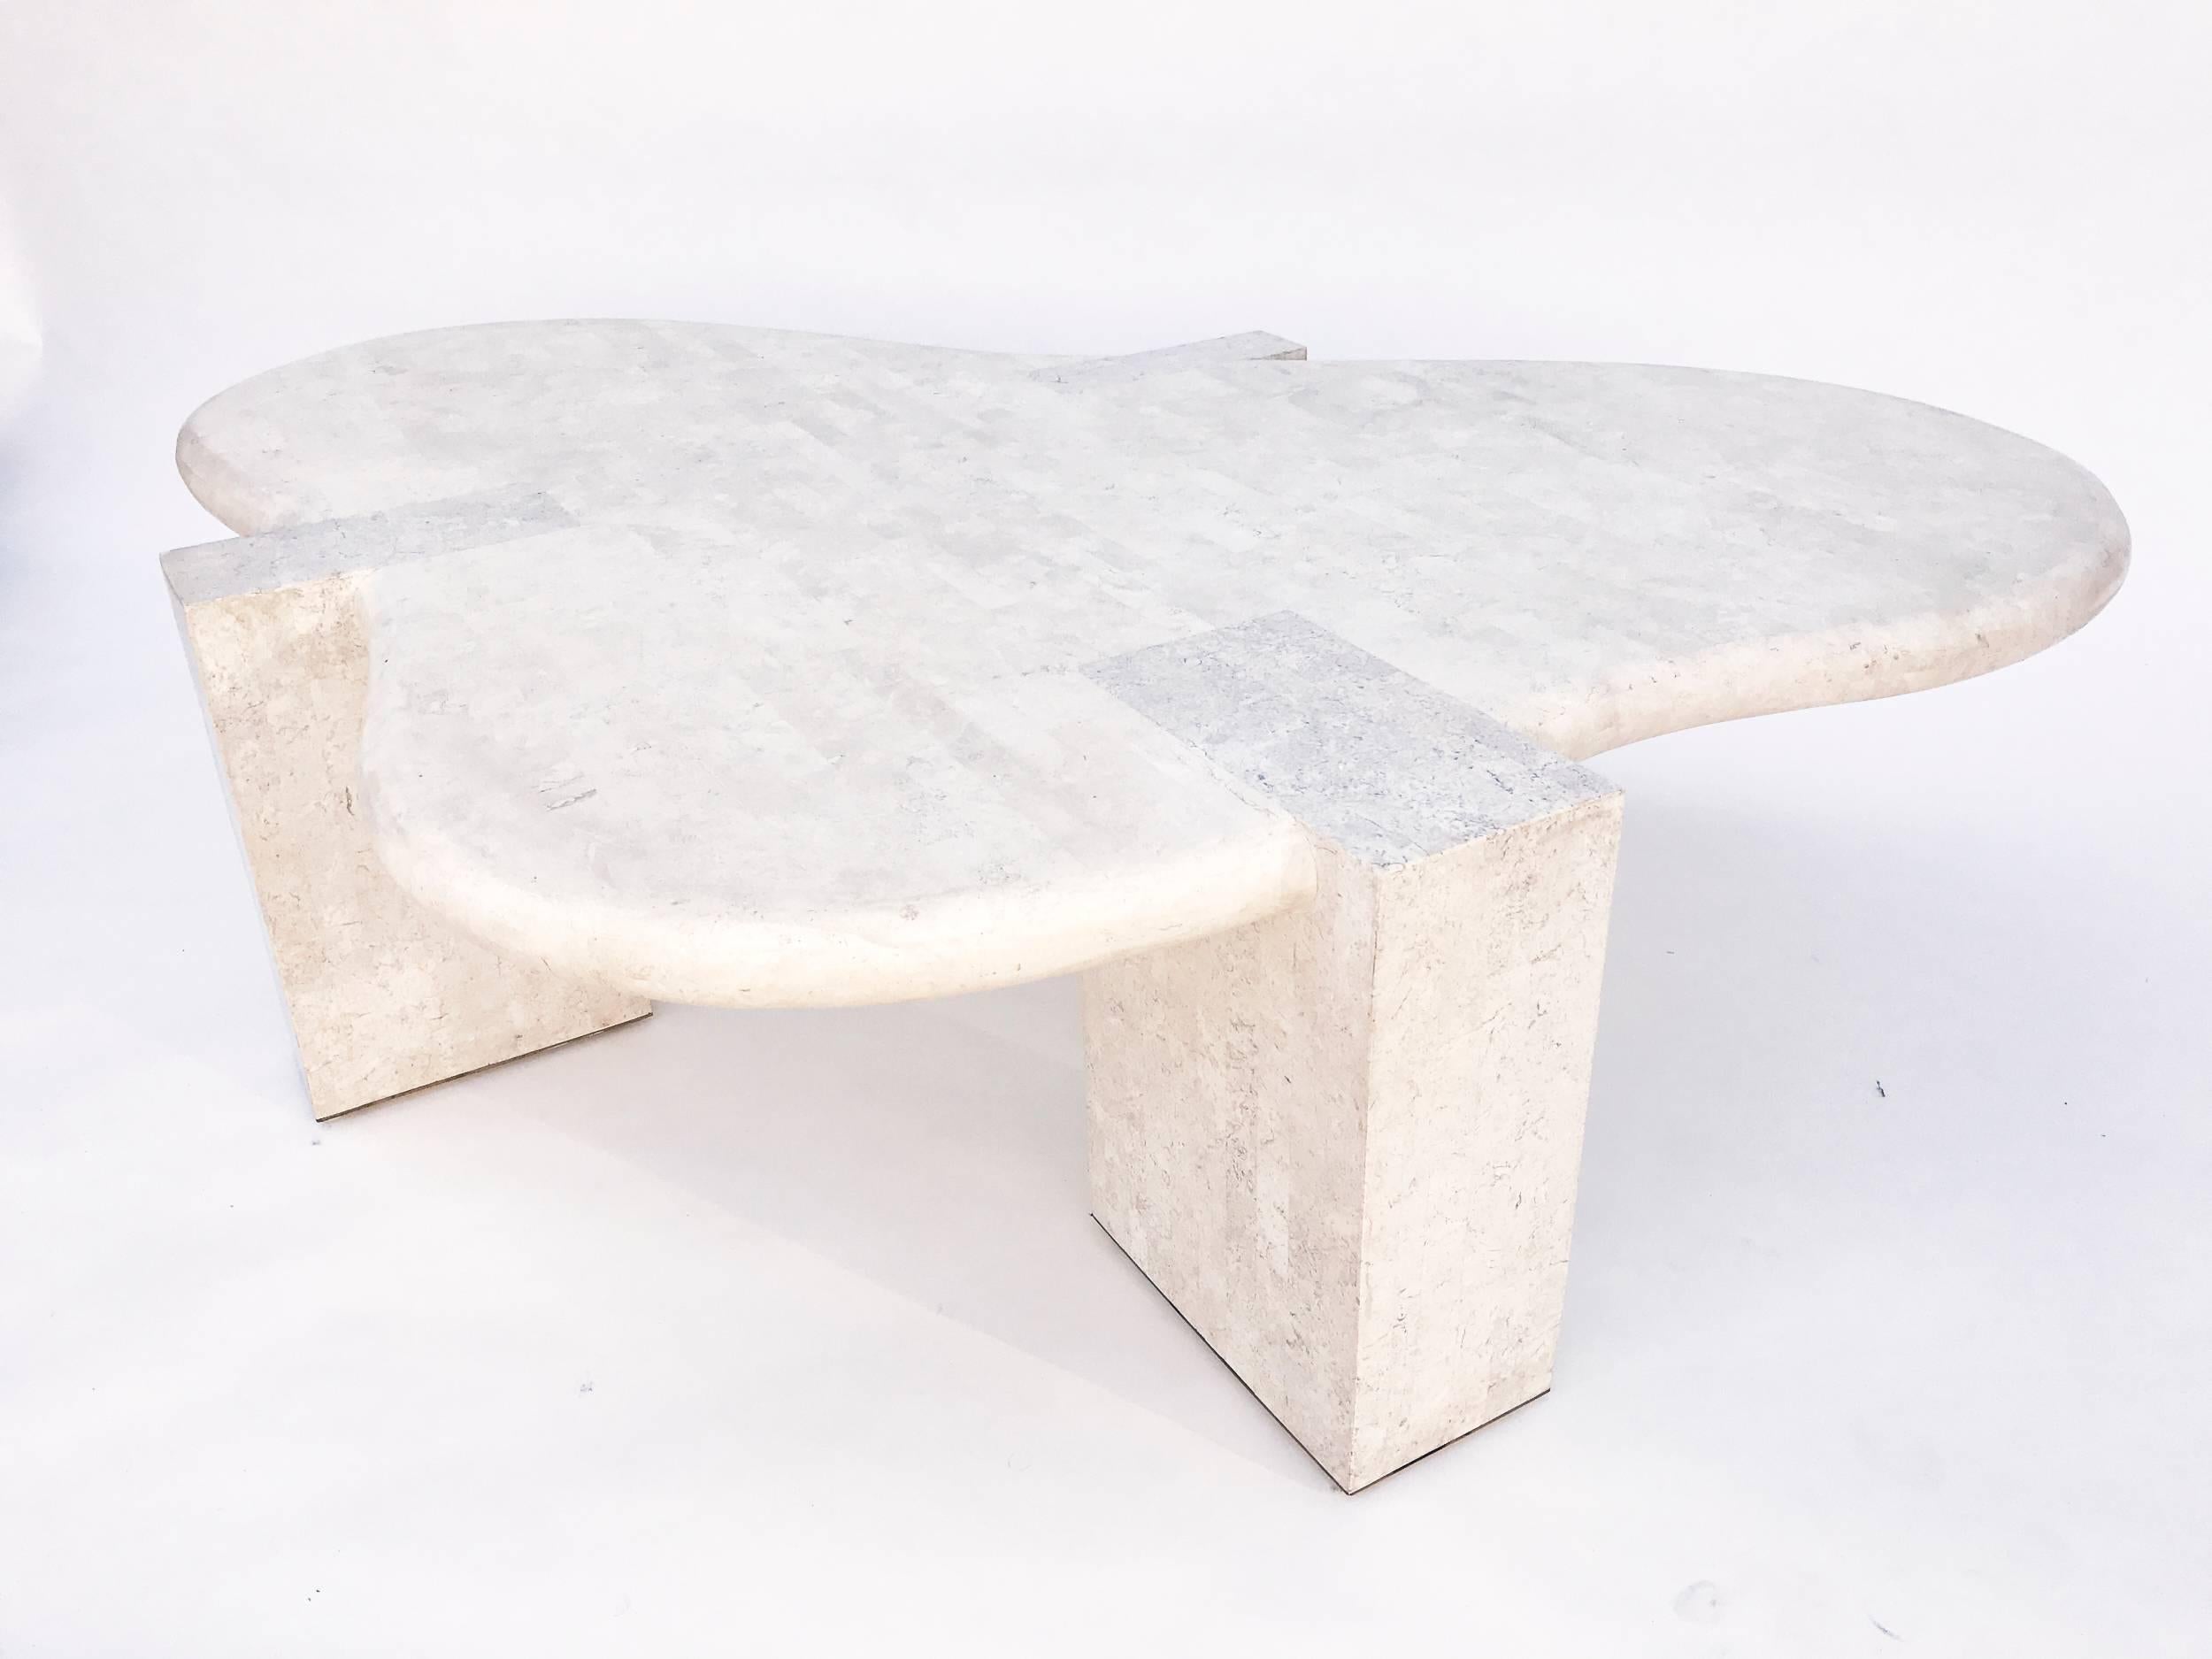 Modern Tessellated Stone Biomorphic Coffee or Cocktail Table by Maitland Smith, 1970s